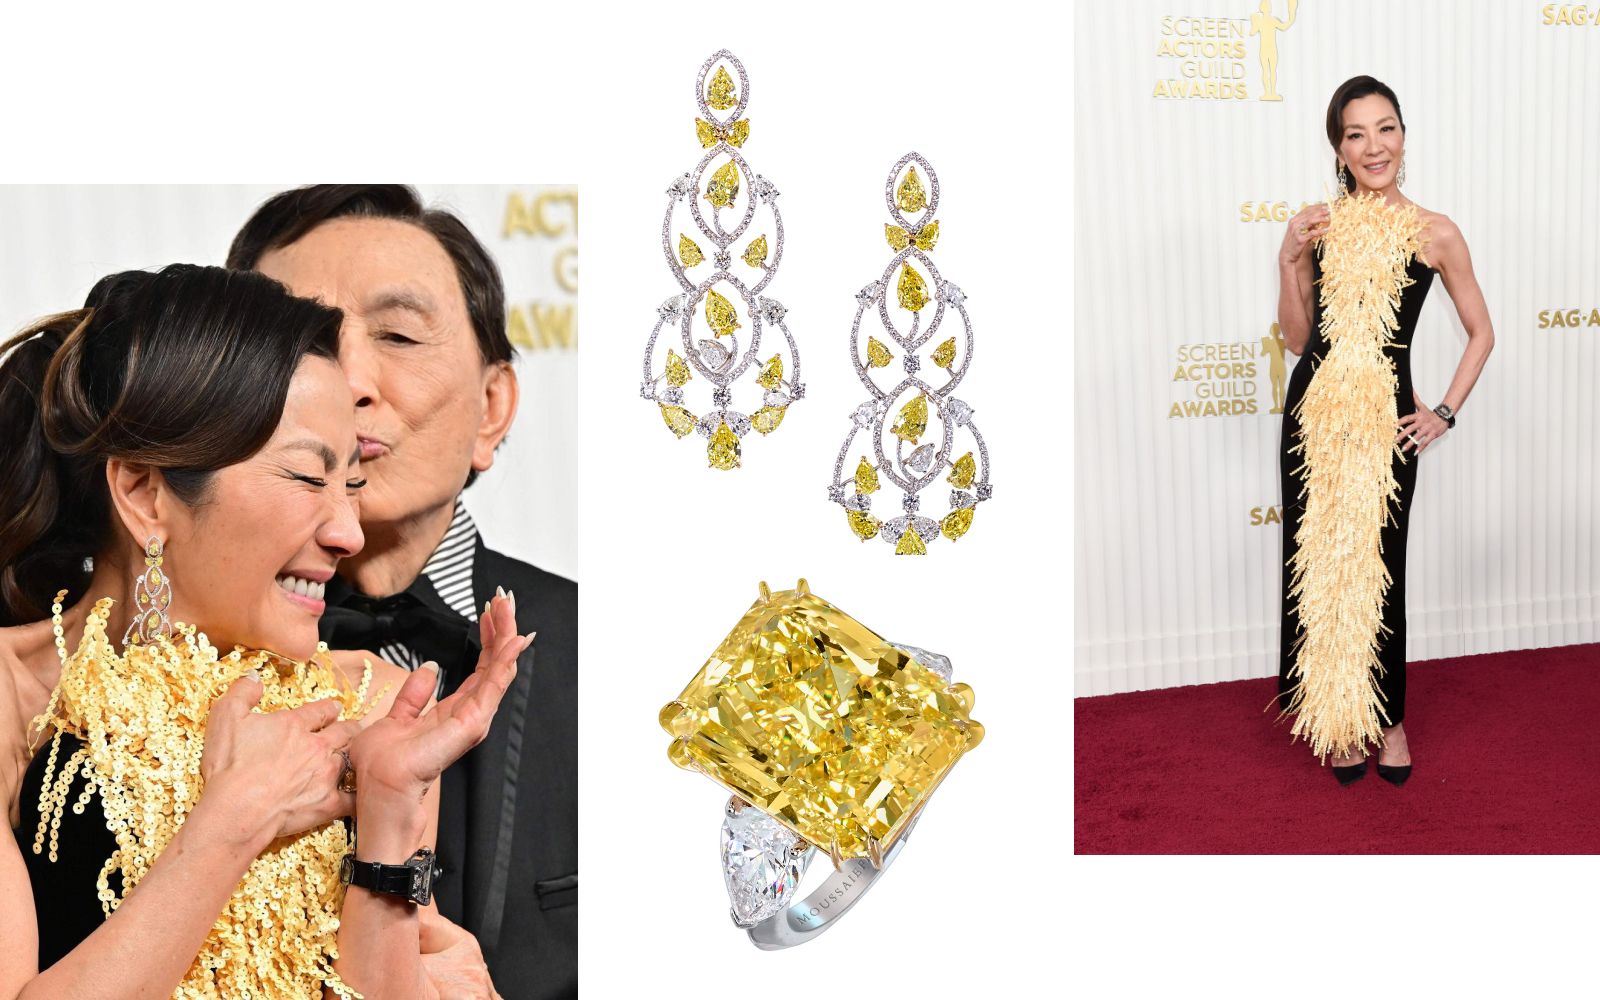 Michelle Yeoh wore a Richard Mille watch and a pair of earrings and ring by Moussaieff at the SAG Awards 2023. The earrings contain 24.70 carats of fancy intense yellow diamonds and 11.08 carats of white diamonds 